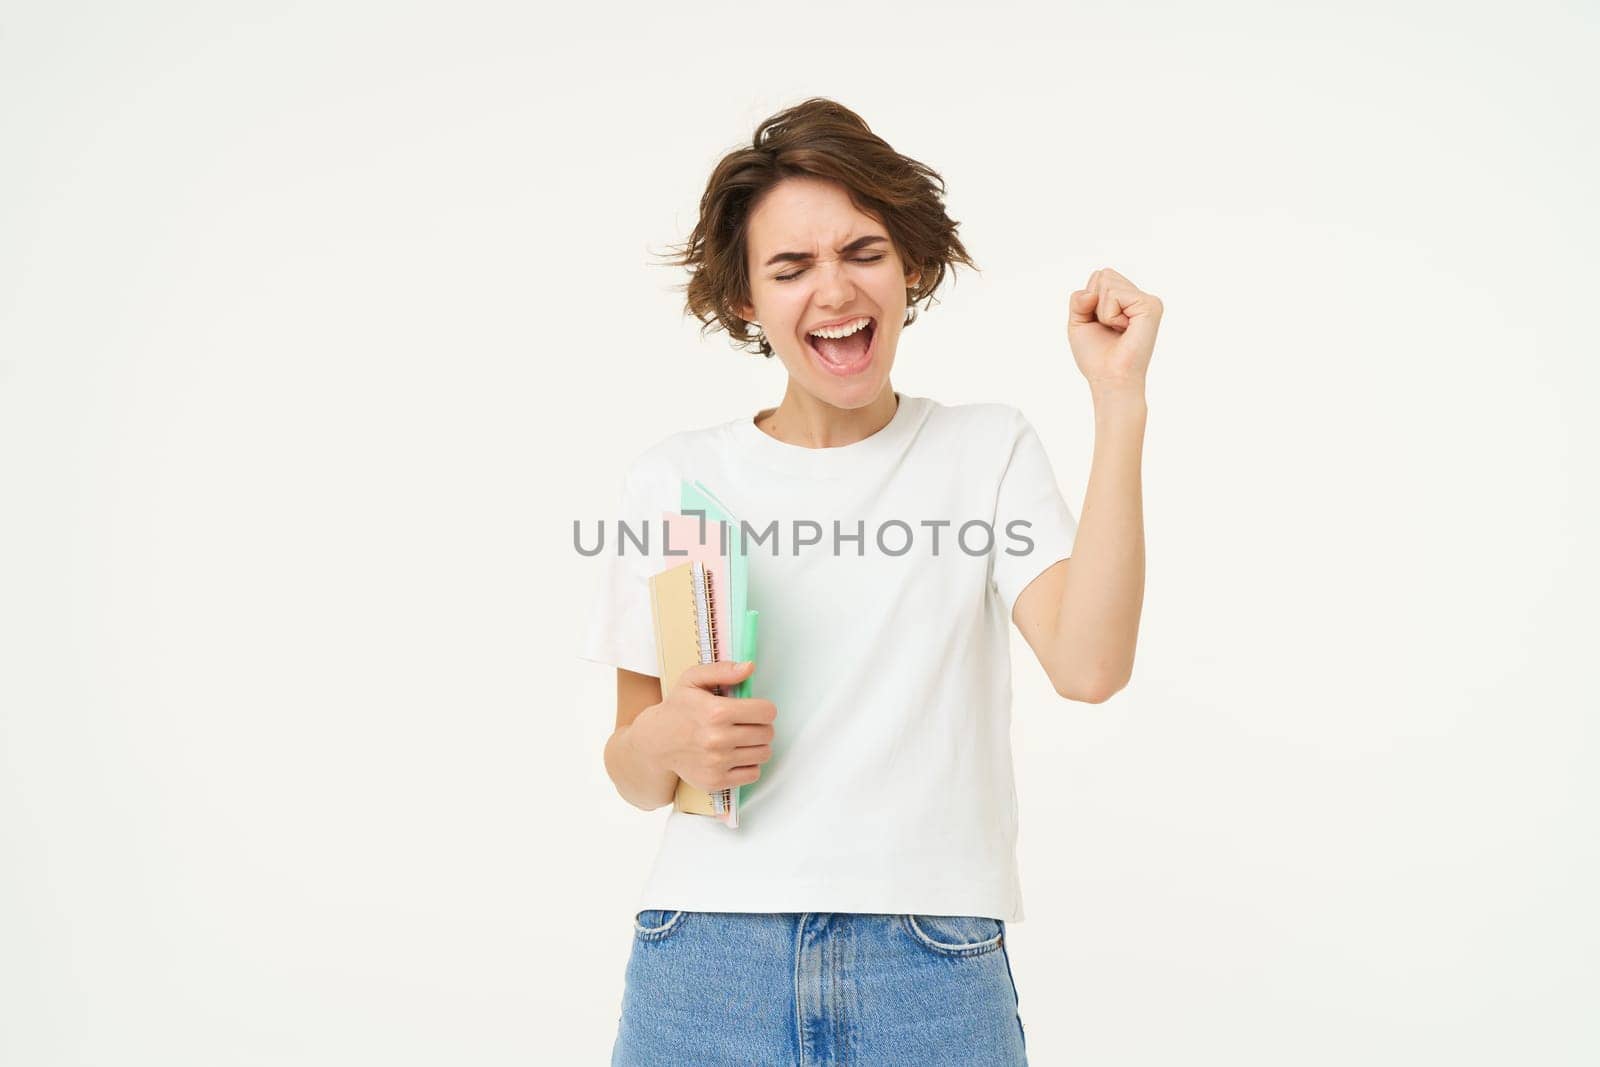 Excited and enthusiastic girl, feeling thrilled, makes fist pump and screams from joy, posing with notebook against white studio background.